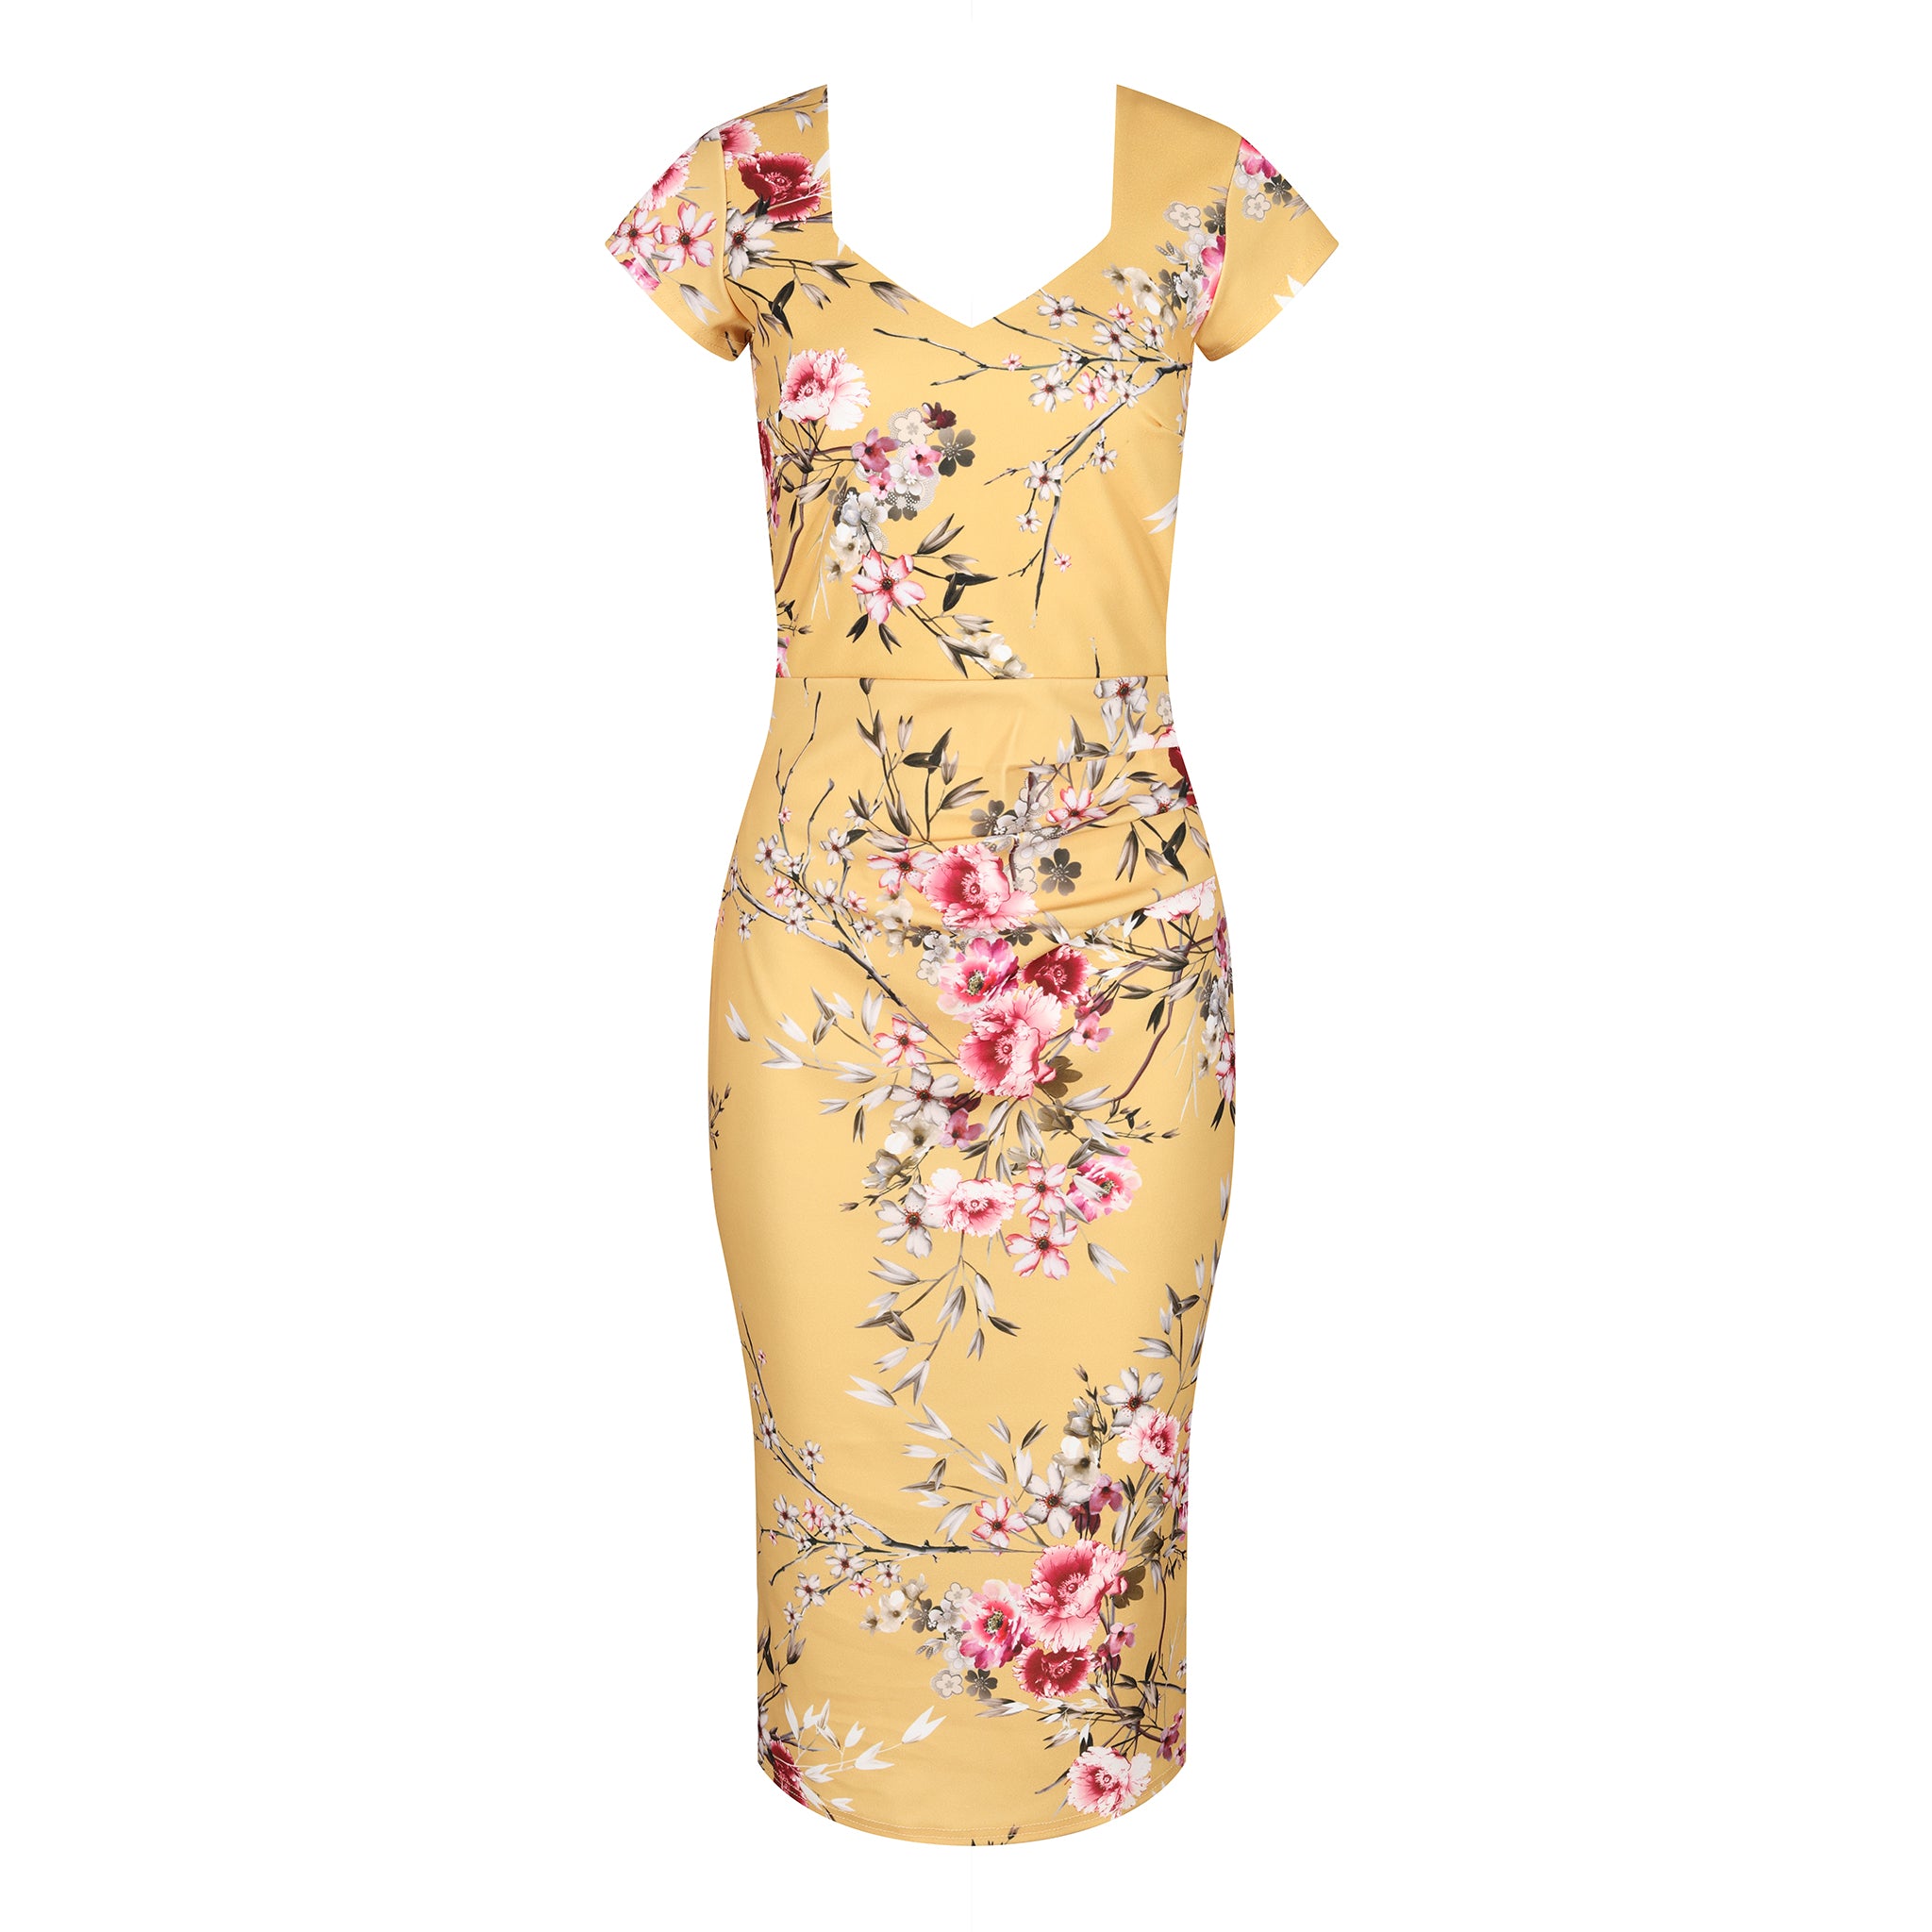 Mustard Yellow Floral Print Cap Sleeve V Neck 40s Style Wiggle Dress